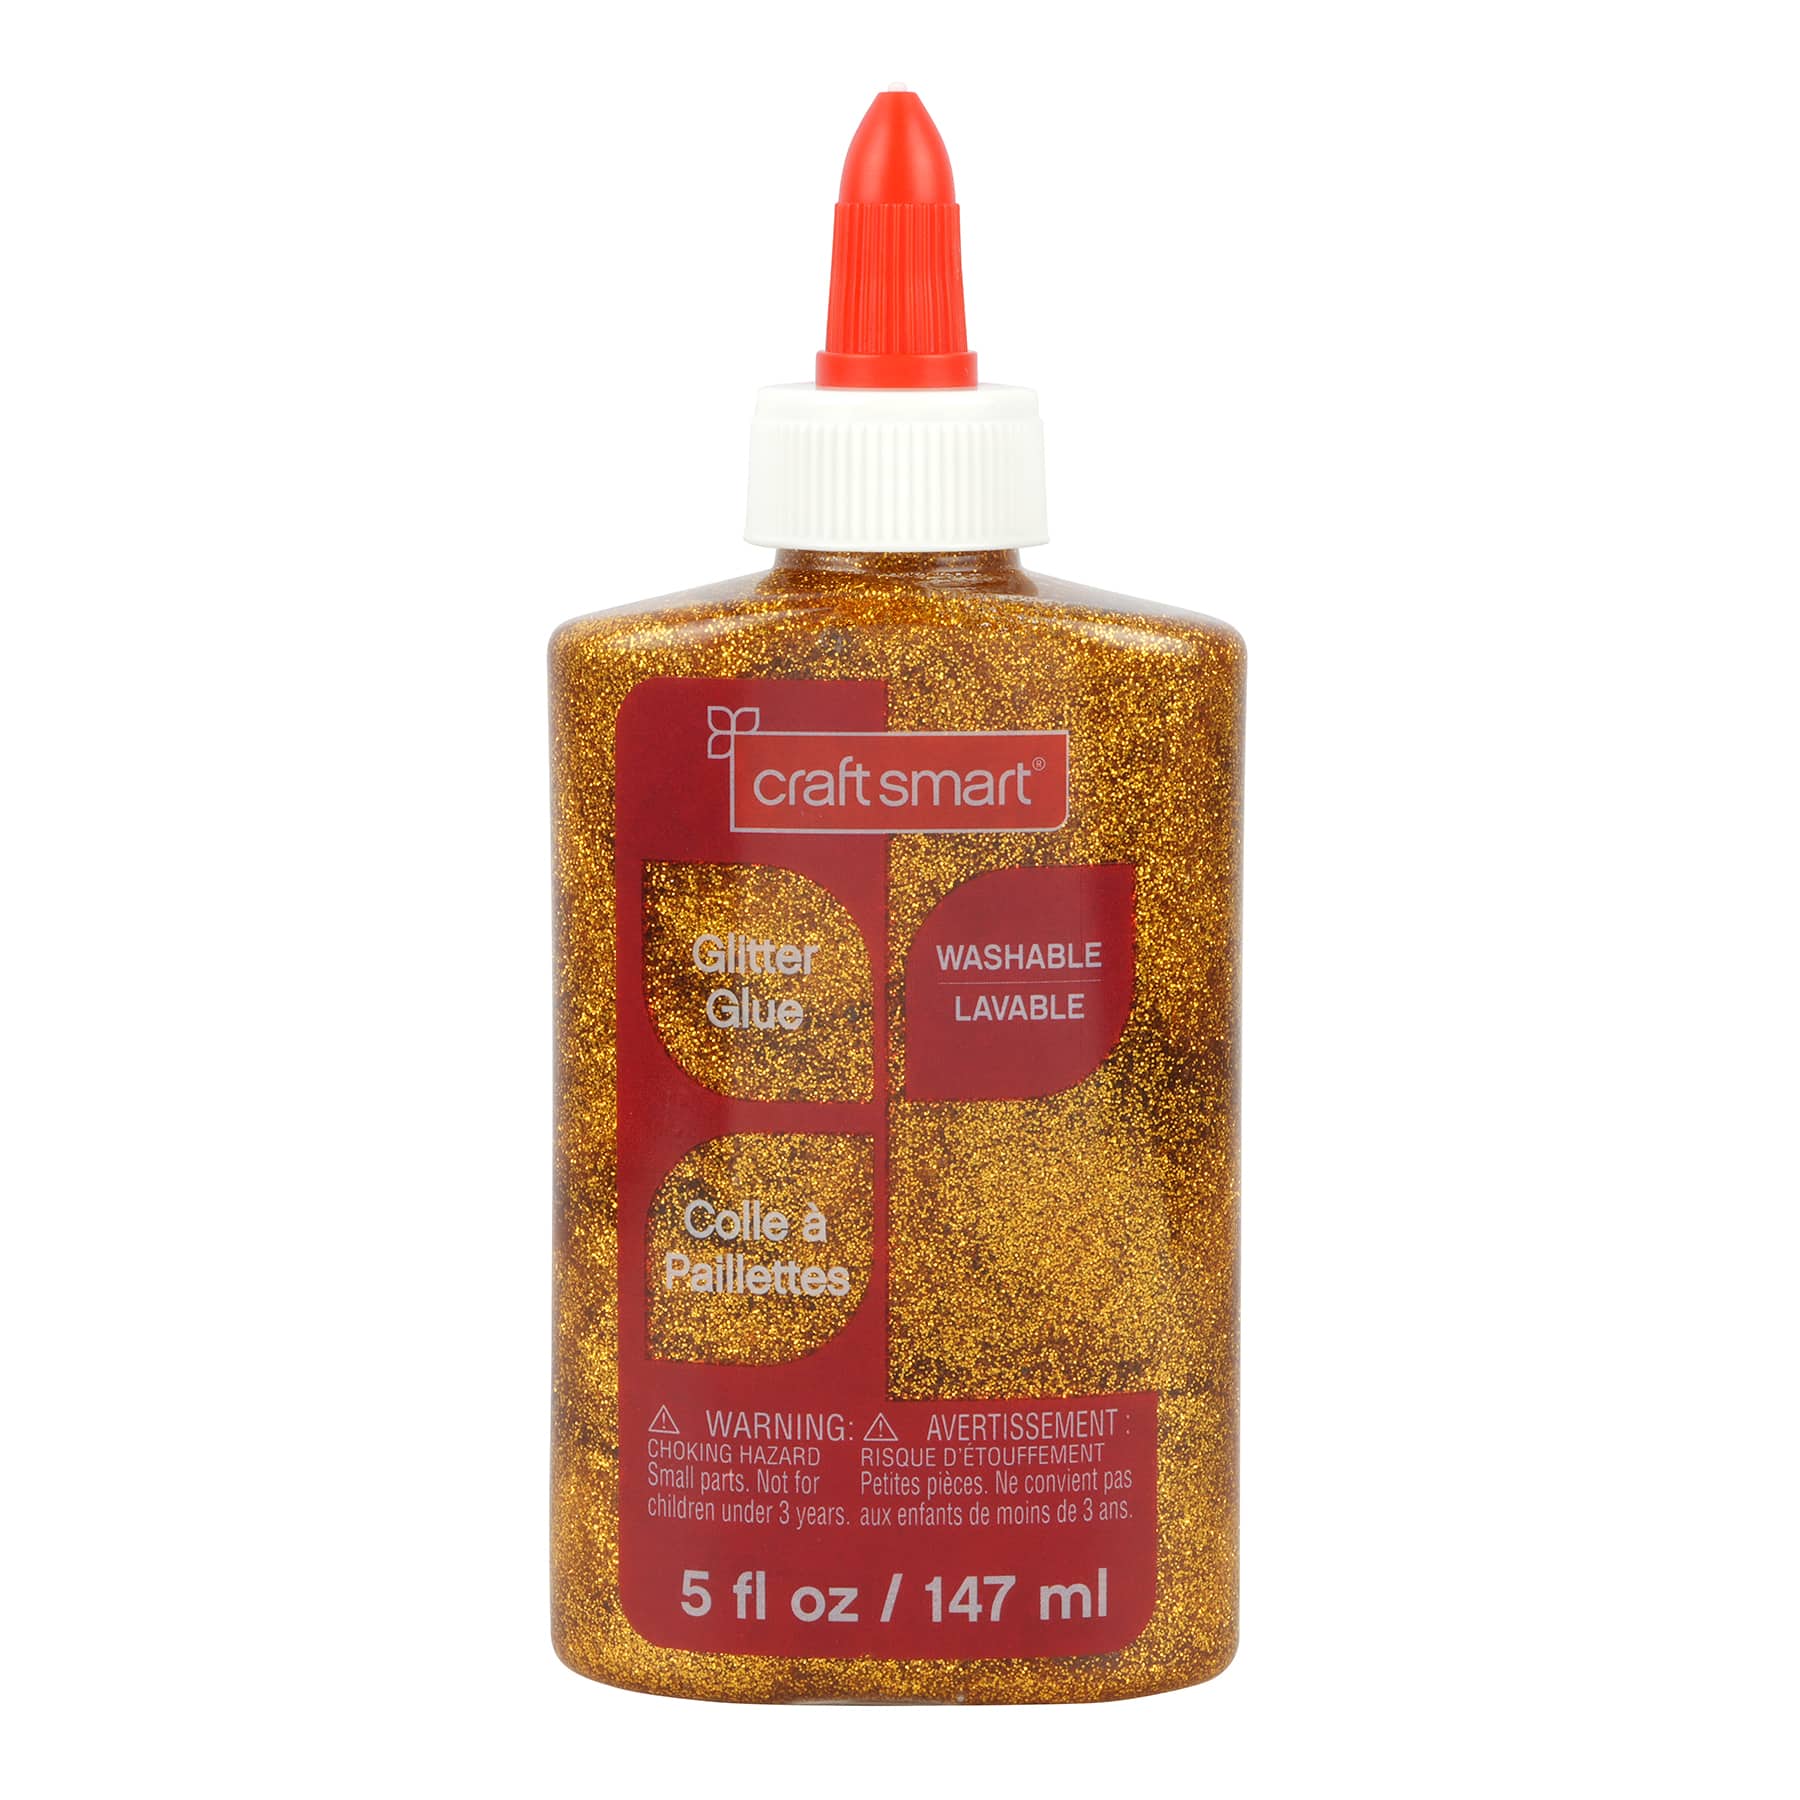 24oz. Oven-Bake Clay by Craft Smart® 